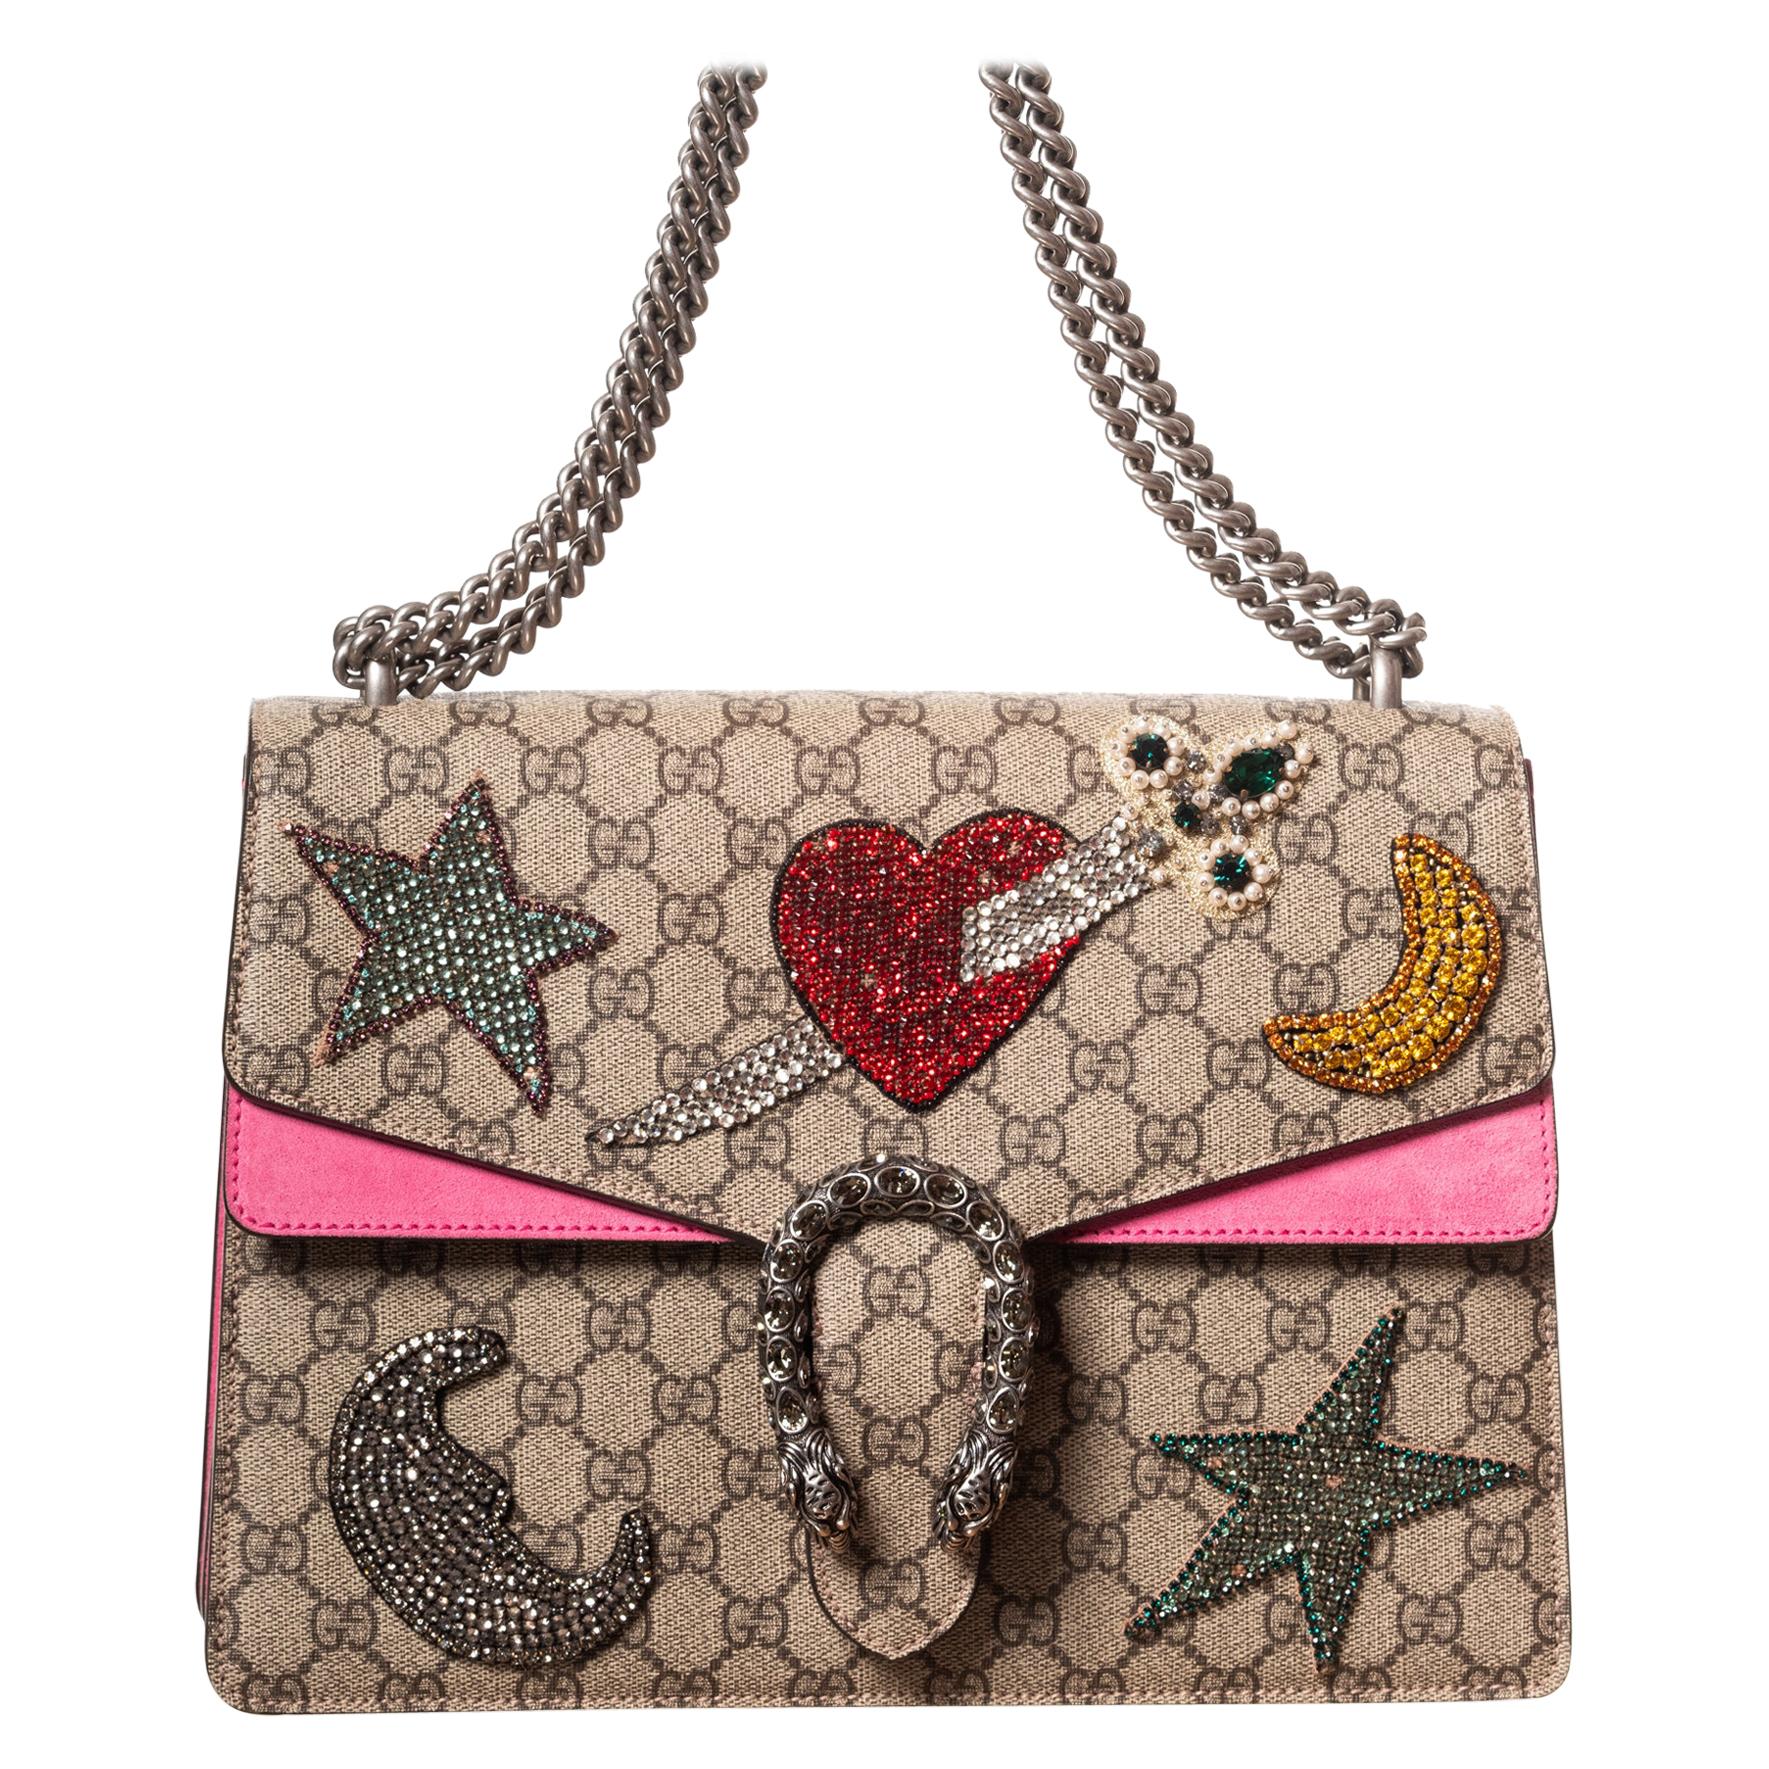 Gucci Dionysus Sequin Embellished GG Coated Canvas Medium